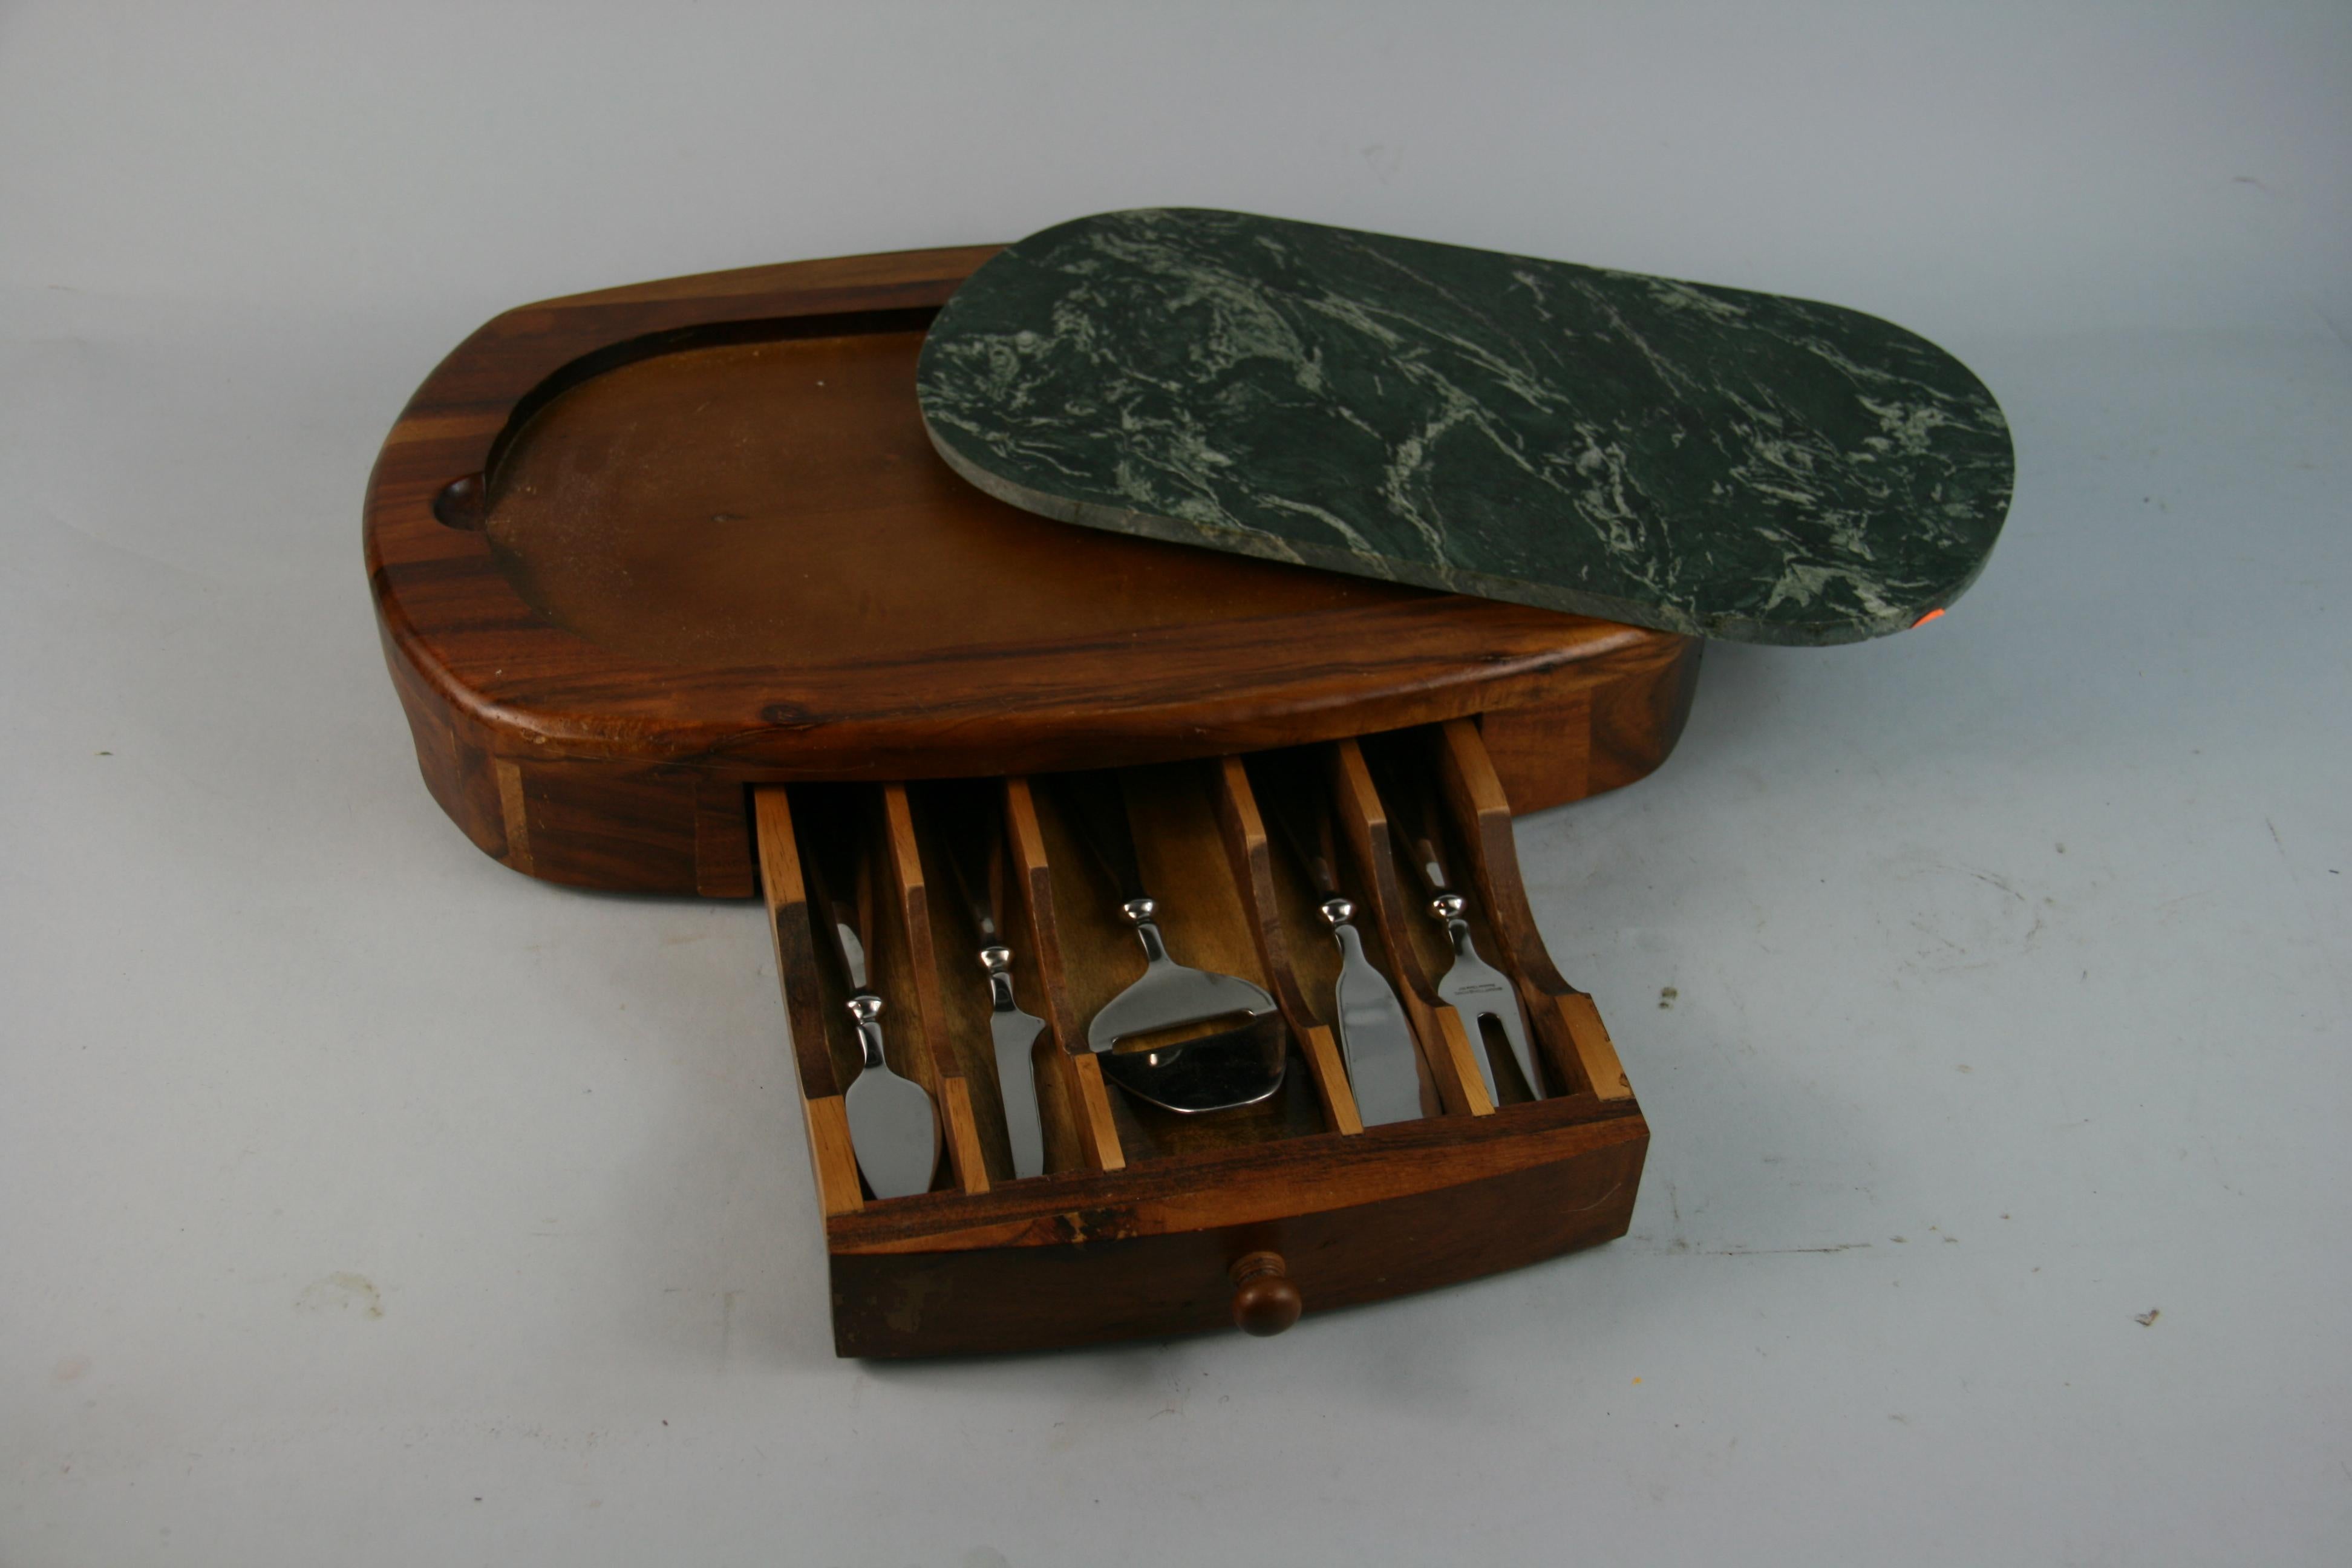 3-783 Green marble cheese board with drawer containing 5 stainless steel knives
Marble is removable for cleaning.